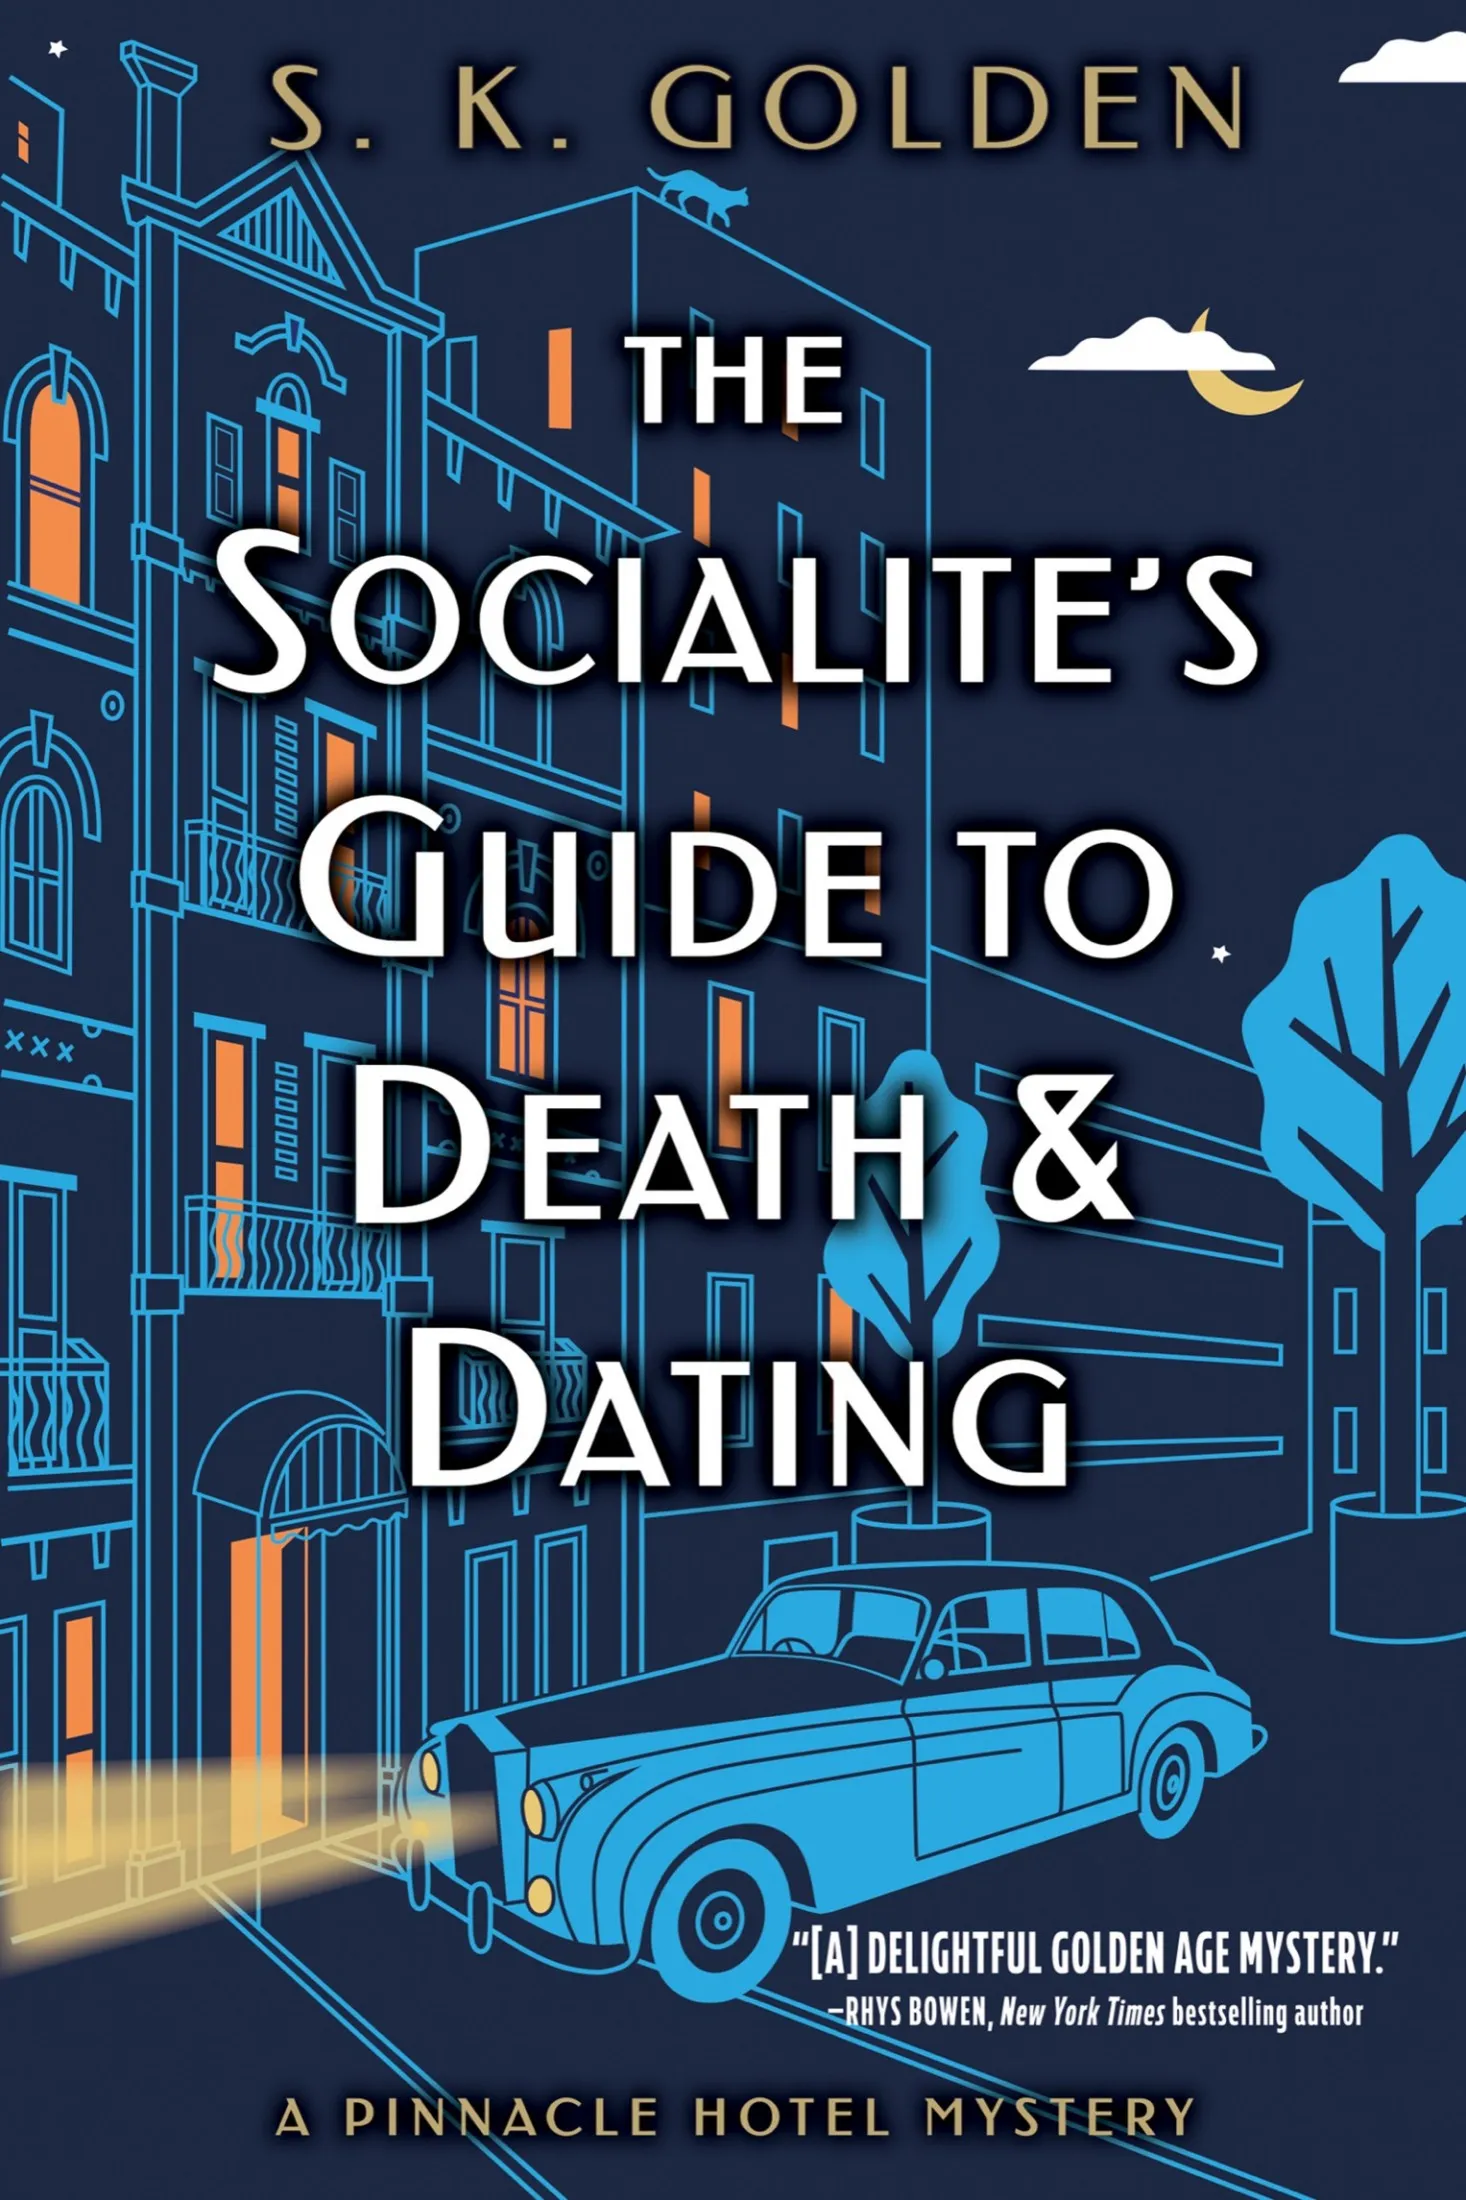 The Socialite's Guide to Death and Dating (A Pinnacle Hotel Mystery #2)